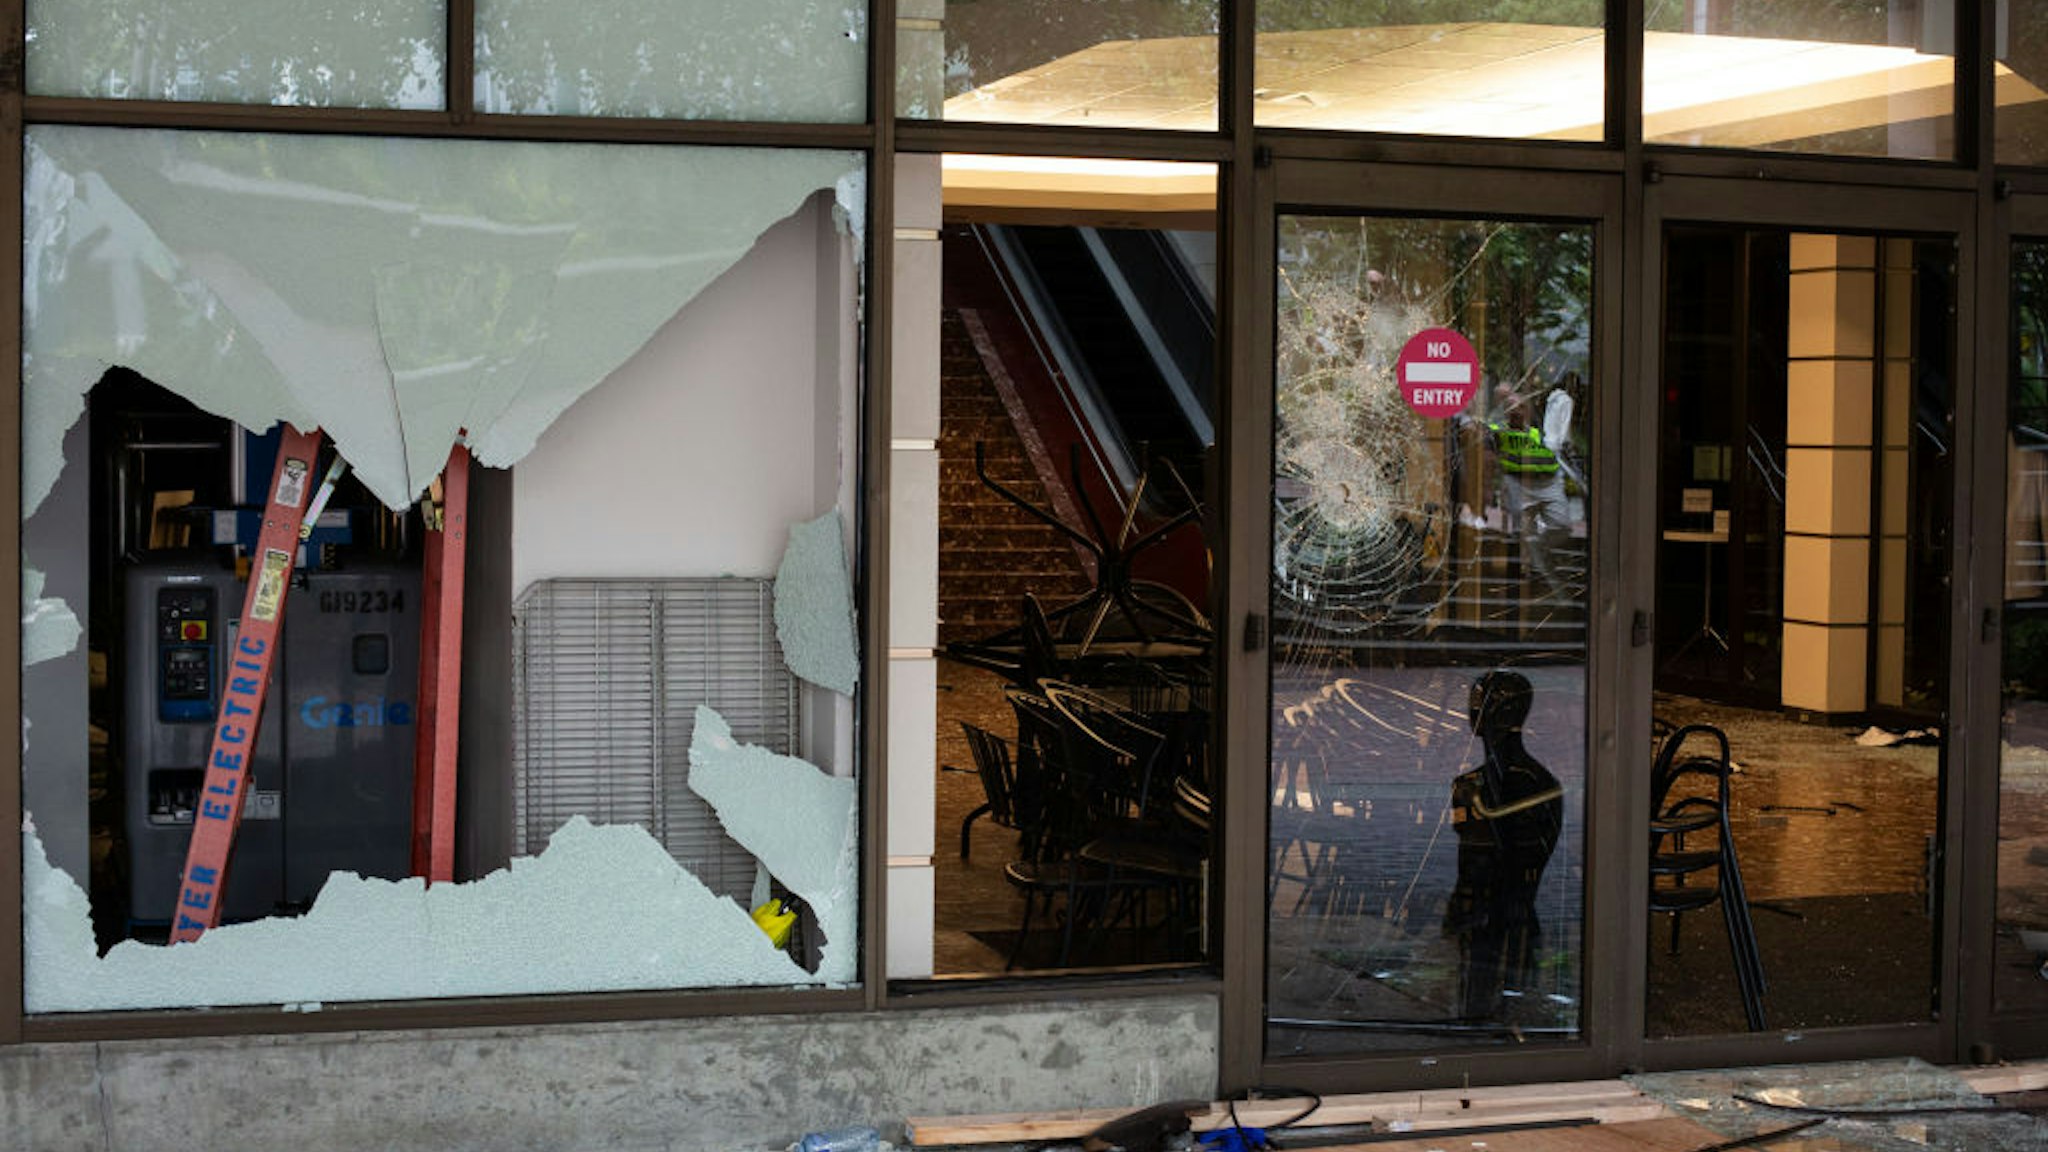 An entrance to Bellevue Square Mall is seen after looting took place on May 31, 2020 in Bellevue, Washington. Protests due to the recent death of George Floyd took place in Bellevue in addition to Seattle, with looting in Bellevue and at least one burned automobile there.